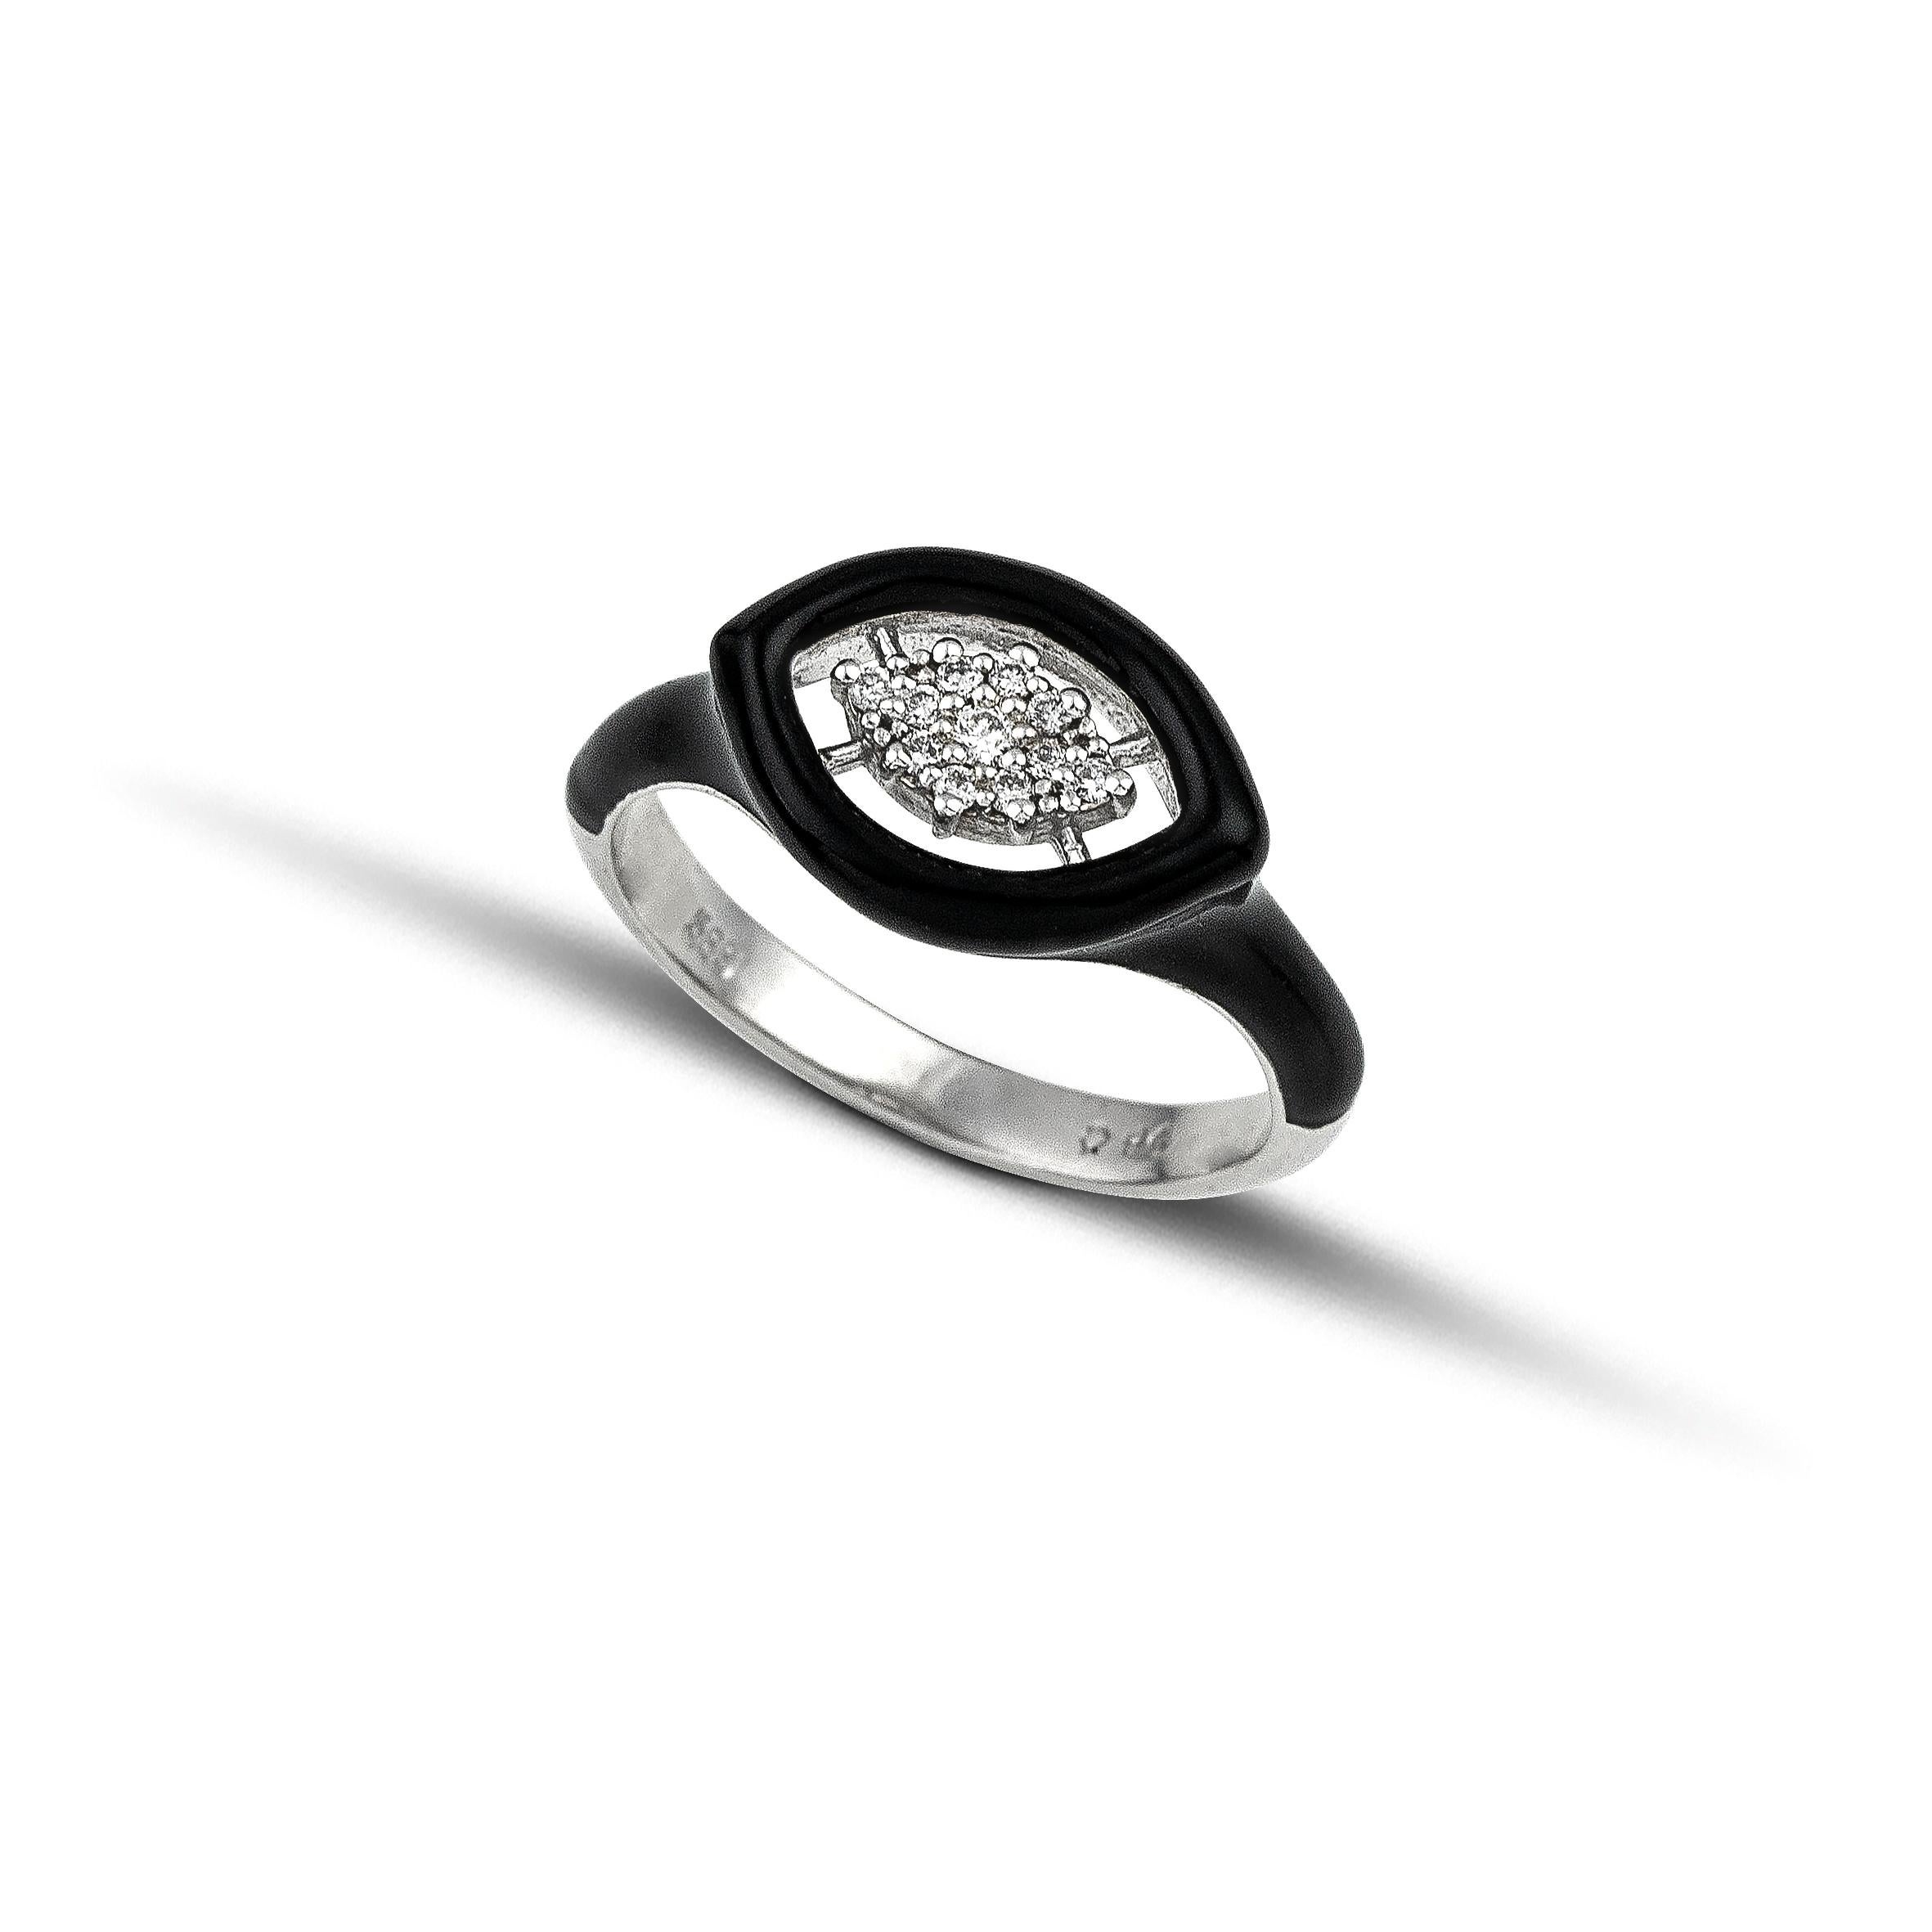 100% Recycled 14 K White Gold

Diamonds

Enamel

Ring size: on order

In the arts, maximalism, a reaction against minimalism, is an aesthetic of excess.

The philosophy can be summarized as “more is more’.

If minimalism has been referred to as the